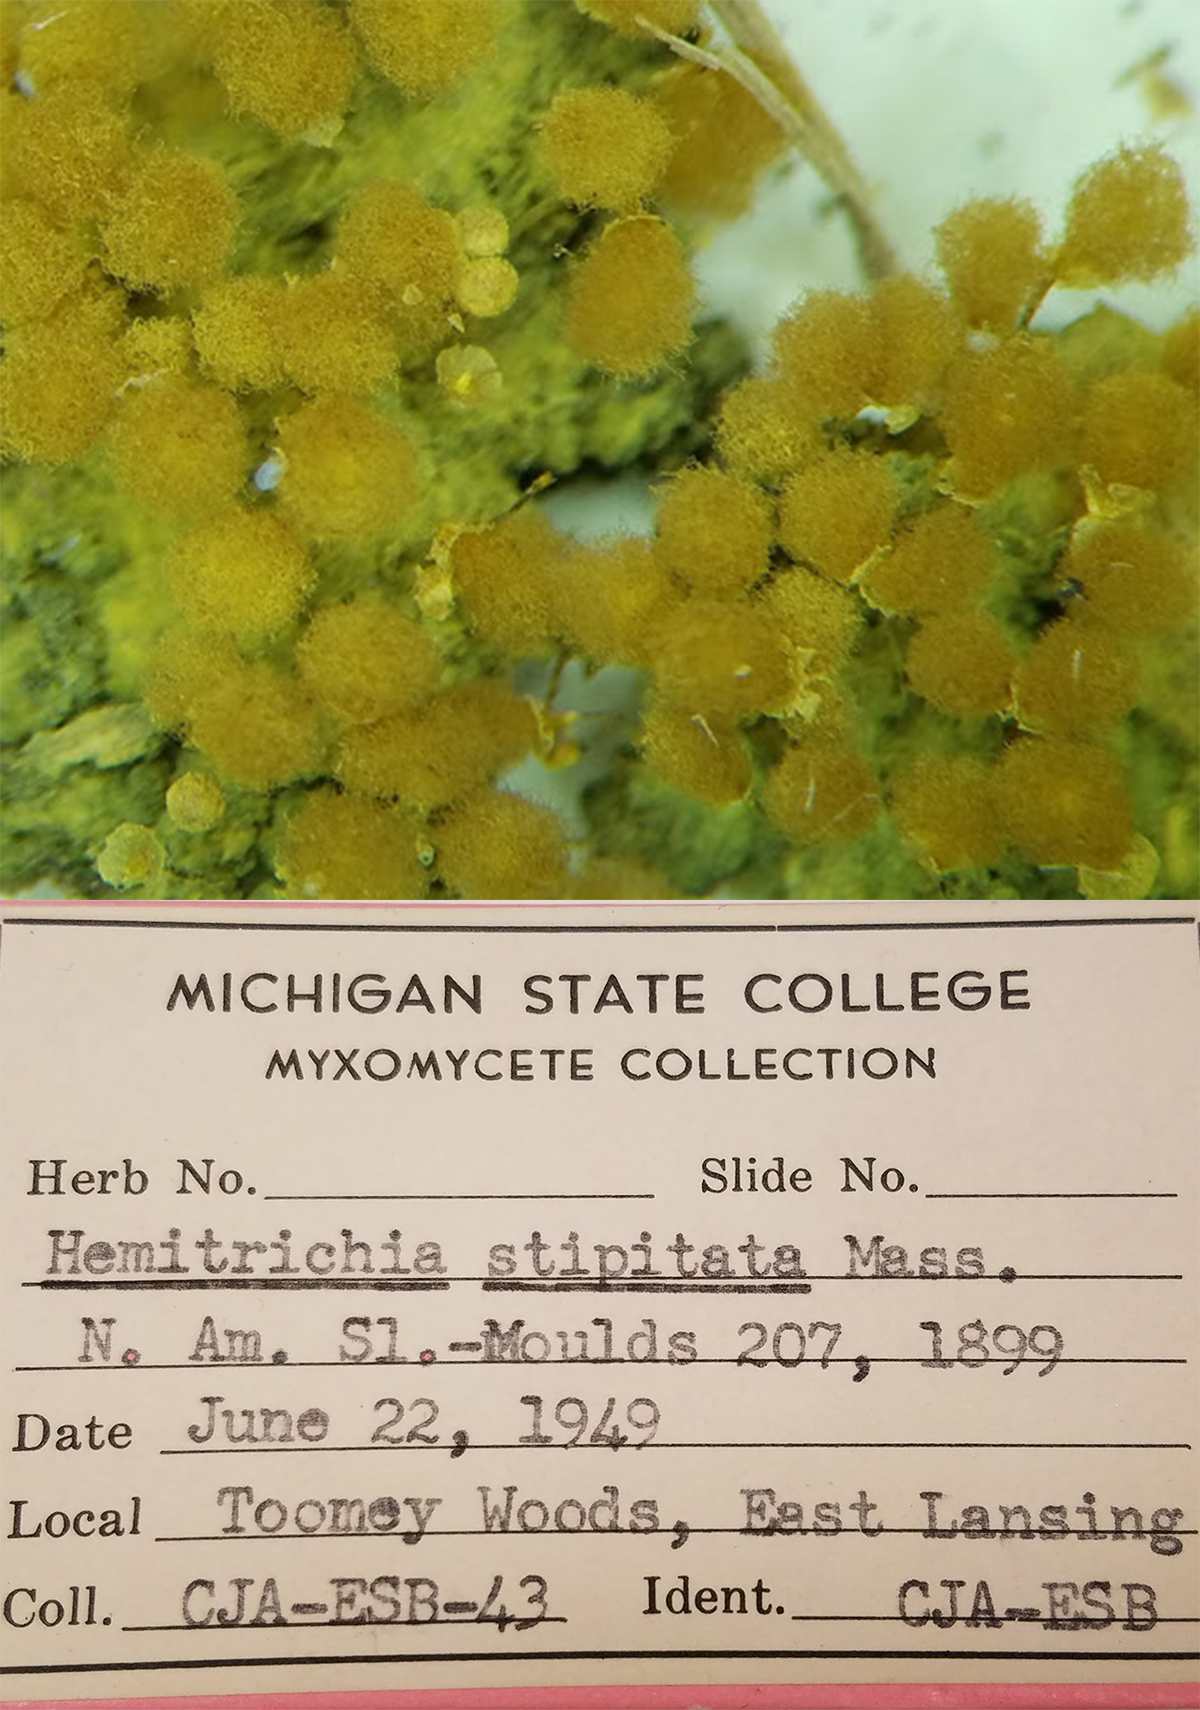 Slime mold and label data